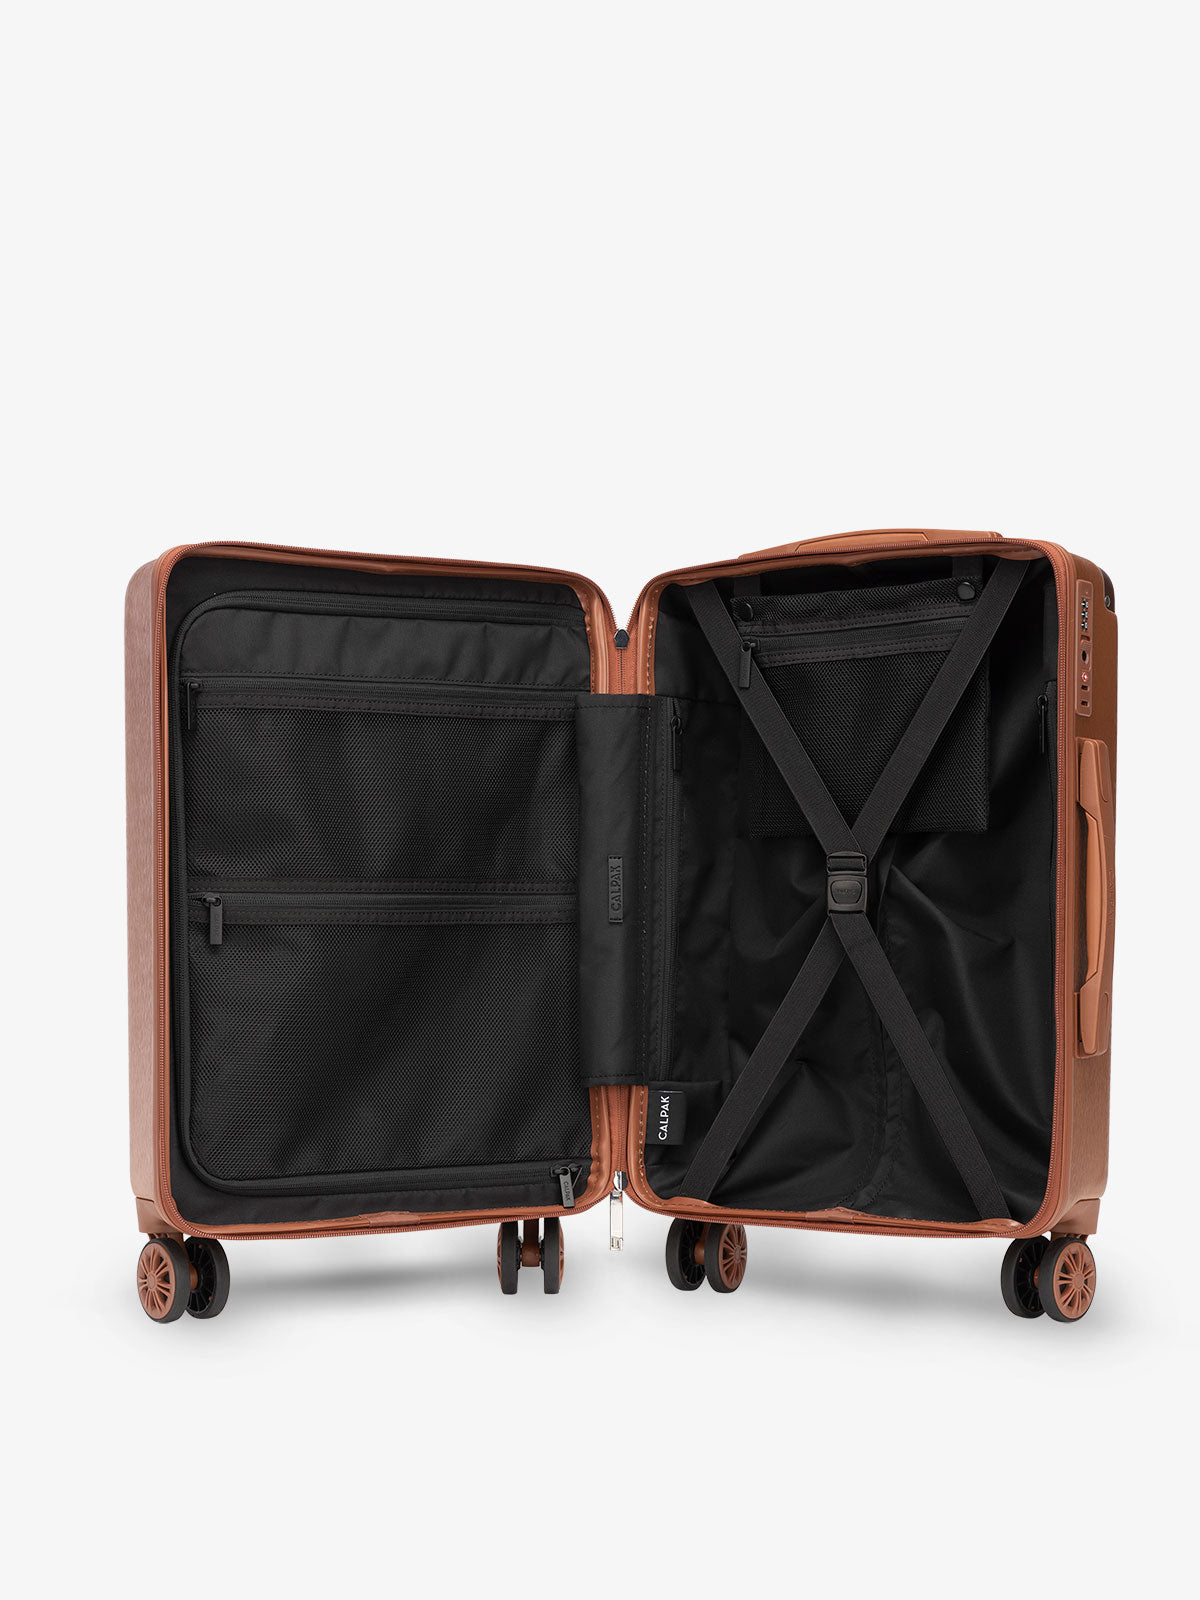 CALPAK Ambeur carry-on interior featuring multiple compartments and compression strap in copper